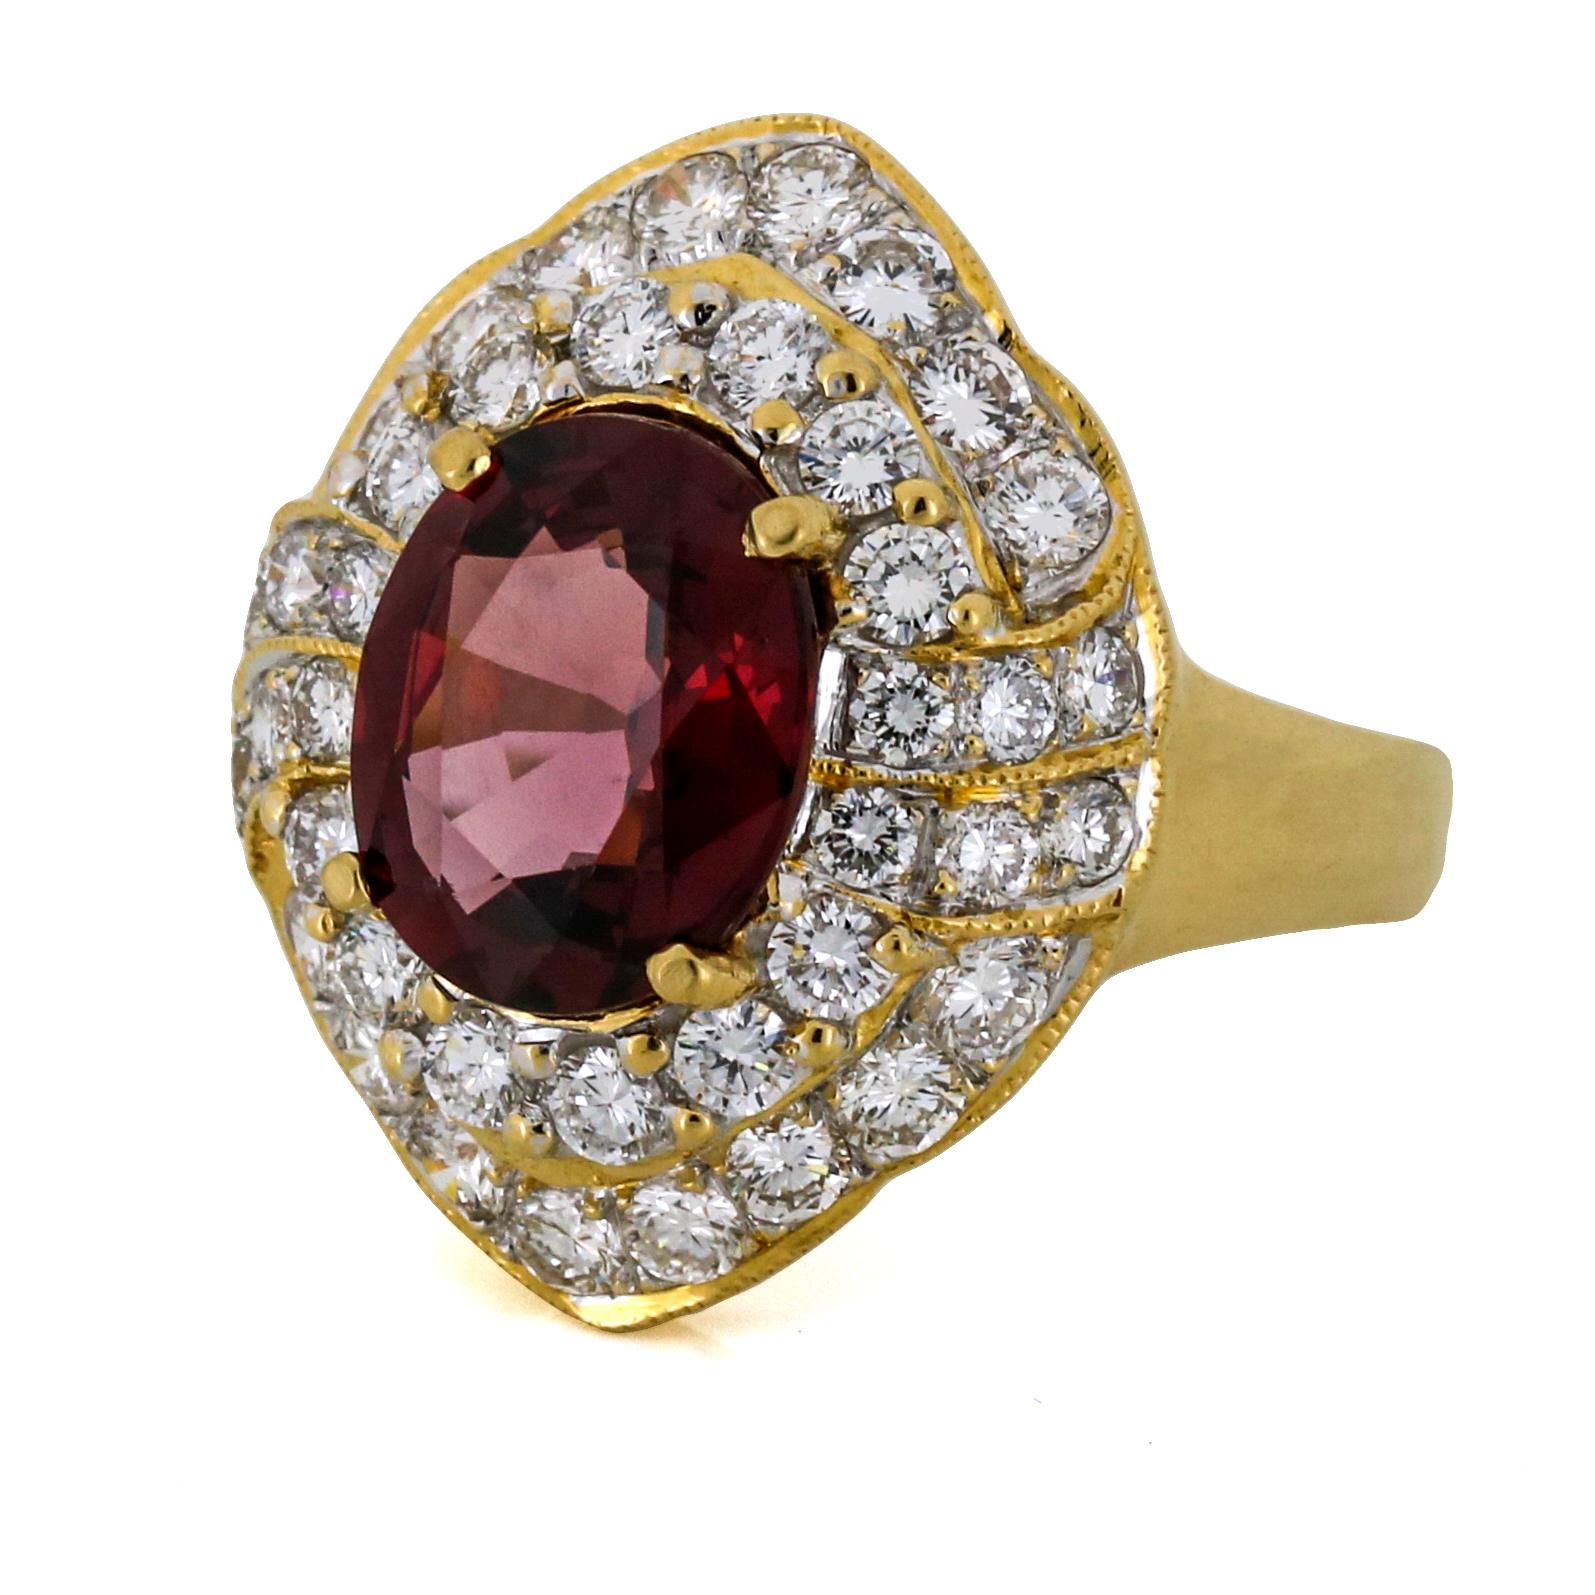 GIA 3.25 Carat Red Spinel Diamond Cocktail Ring in 18 Karat Yellow Gold For Sale 4